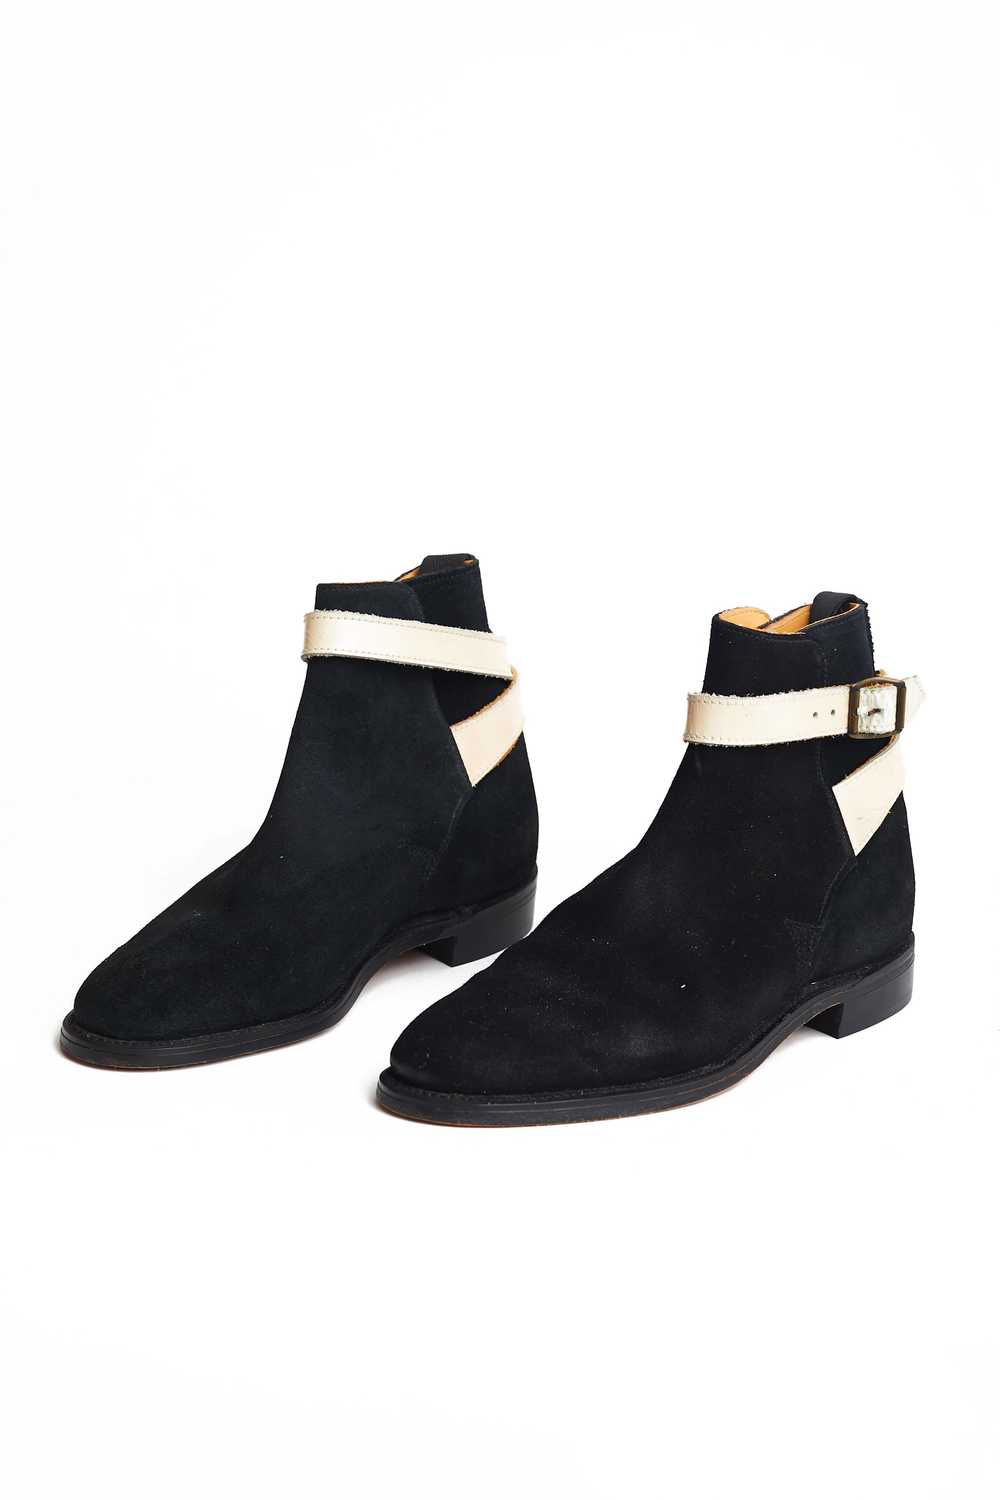 Vivienne Westwood 70's Sex suede Pirate boots - image 2